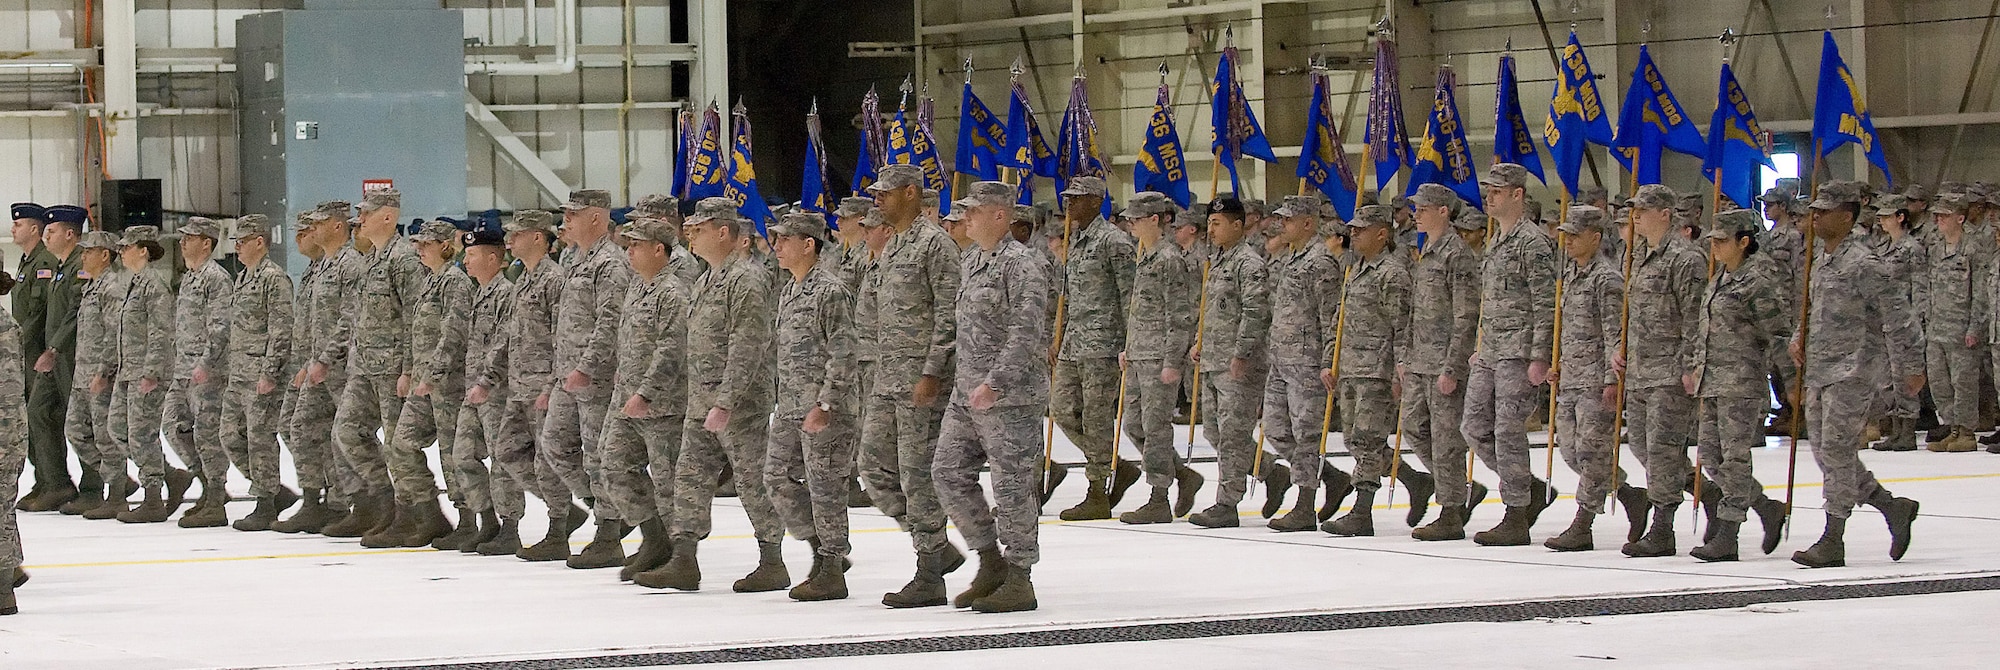 Squadron commanders and their guidon bearers from the 436th Airlift Wing march in formation as the Eagle Wing is presented to Col. Eric Wydra, 436th AW vice commander and commander of troops, during the change-of-command ceremony Jan. 9.  Col. Manson O. Morris assumed command of the Eagle Wing from Col. Steven B. Harrison. (U.S. Air Force photo/Jason Minto)